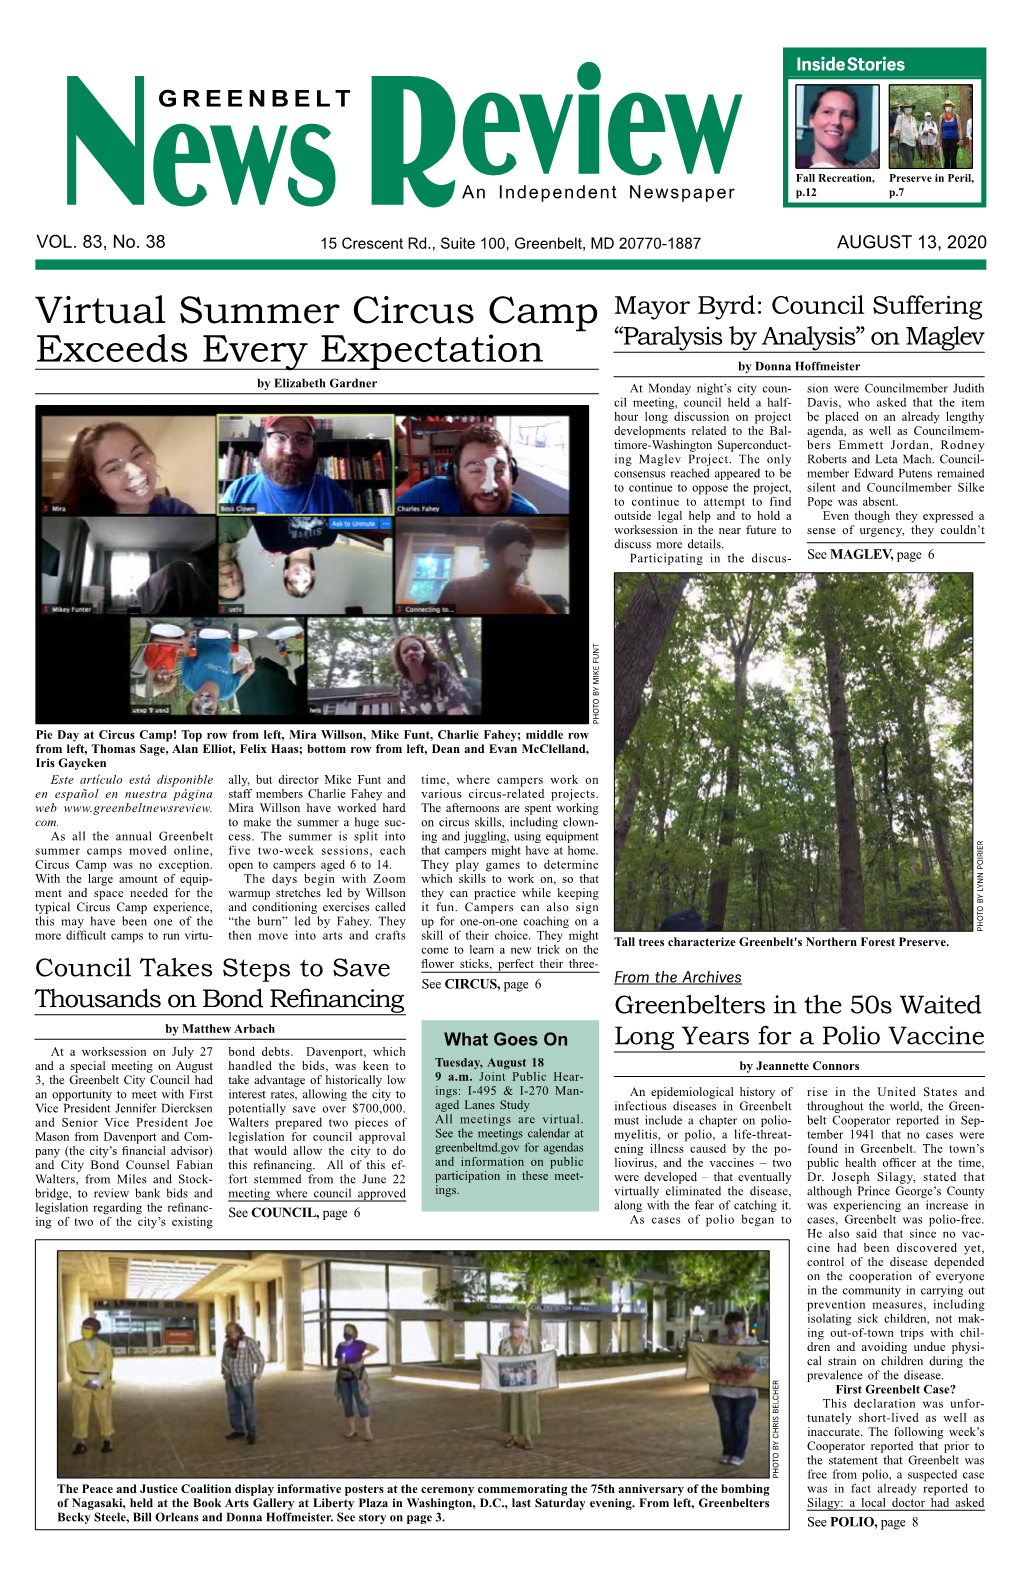 Virtual Summer Circus Camp Exceeds Every Expectation